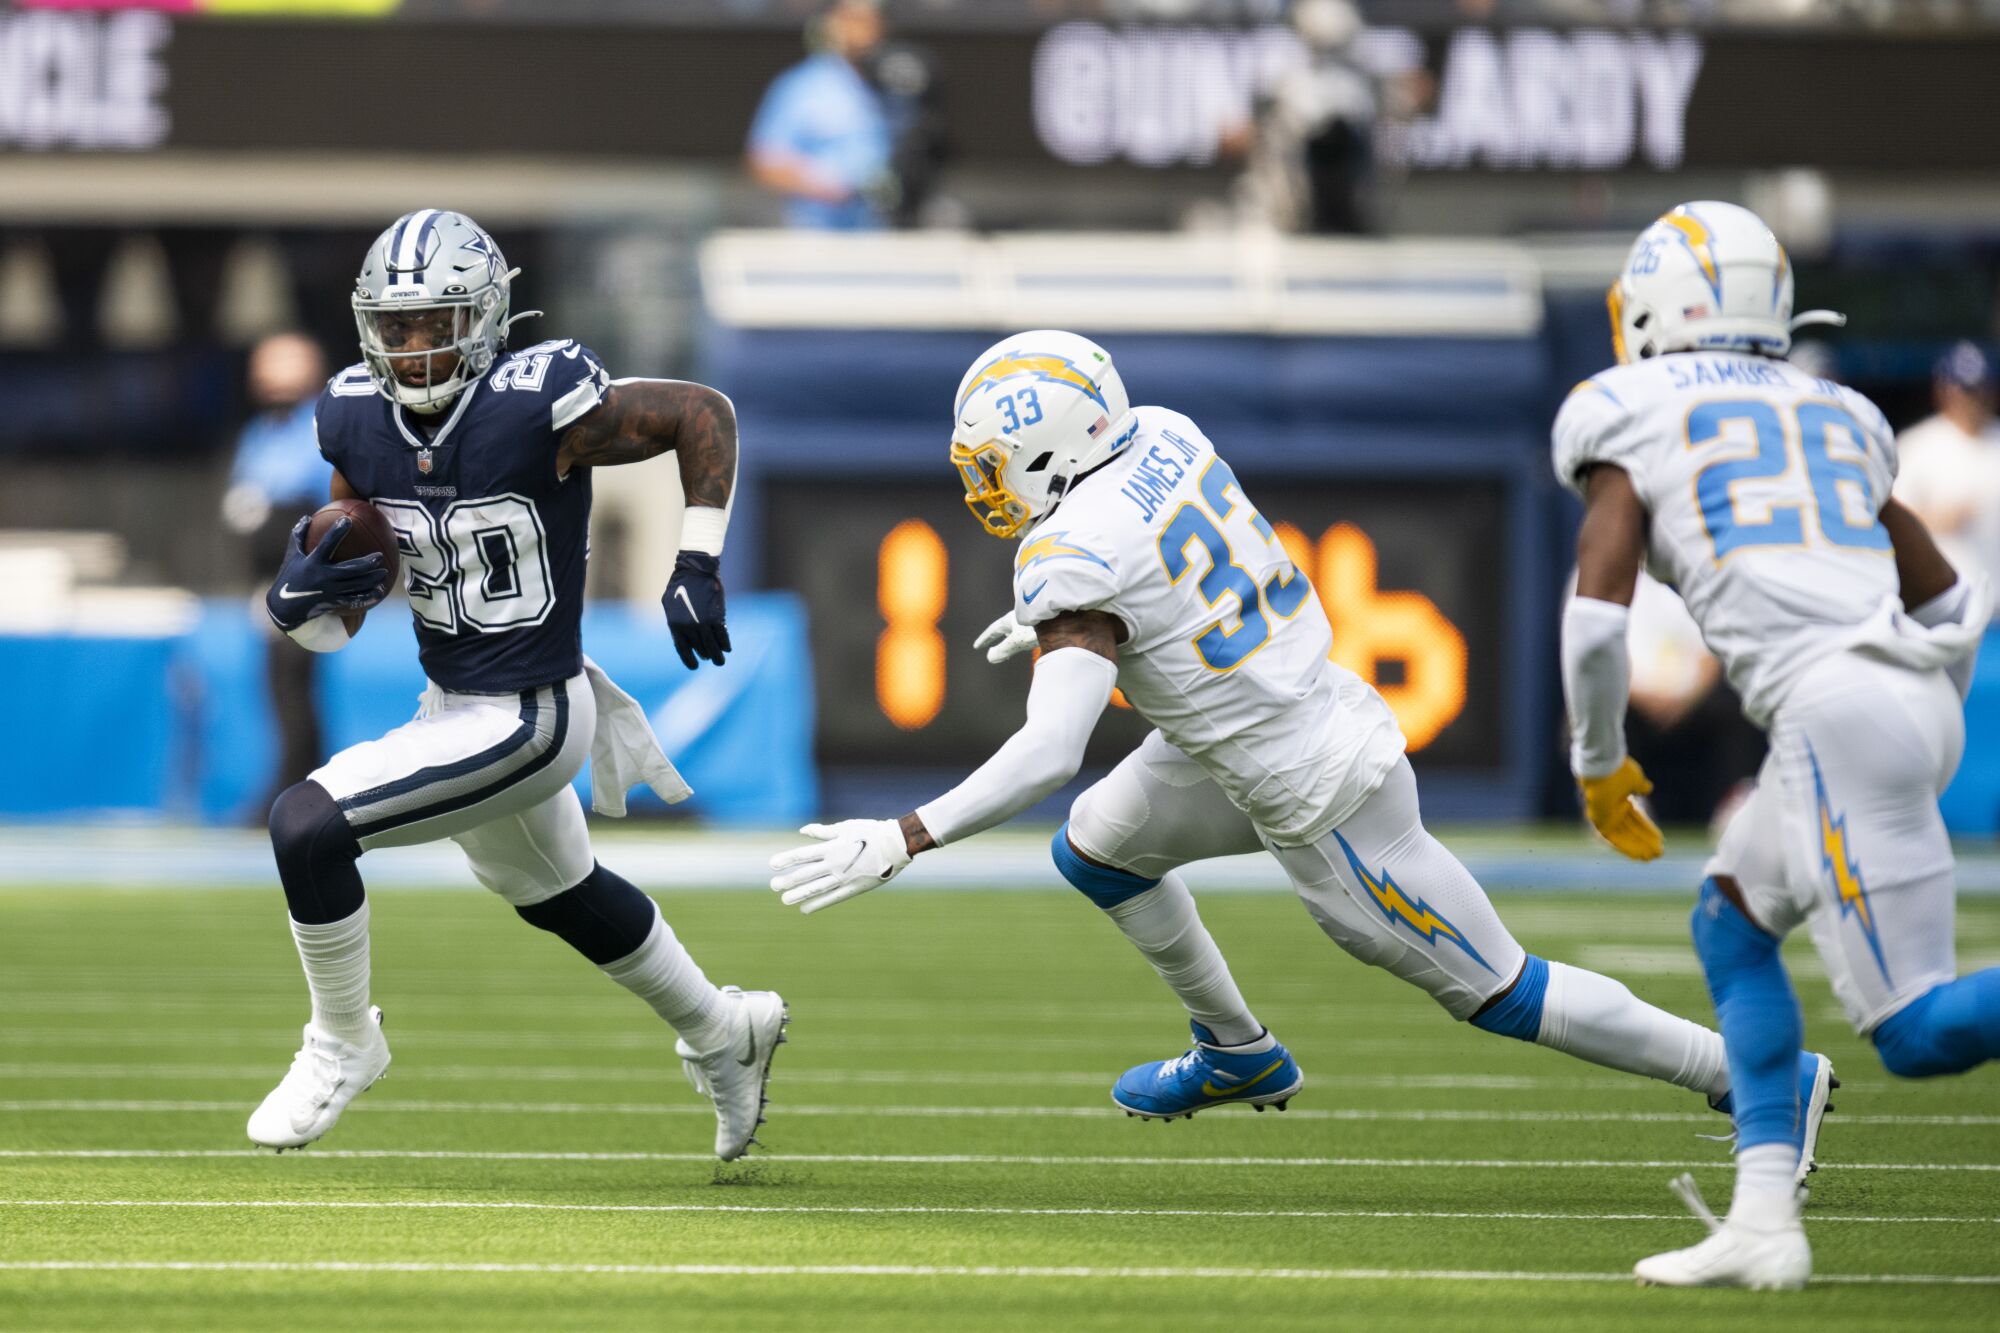 Dallas Cowboys running back Tony Pollard sprints past Chargers free safety Derwin James.